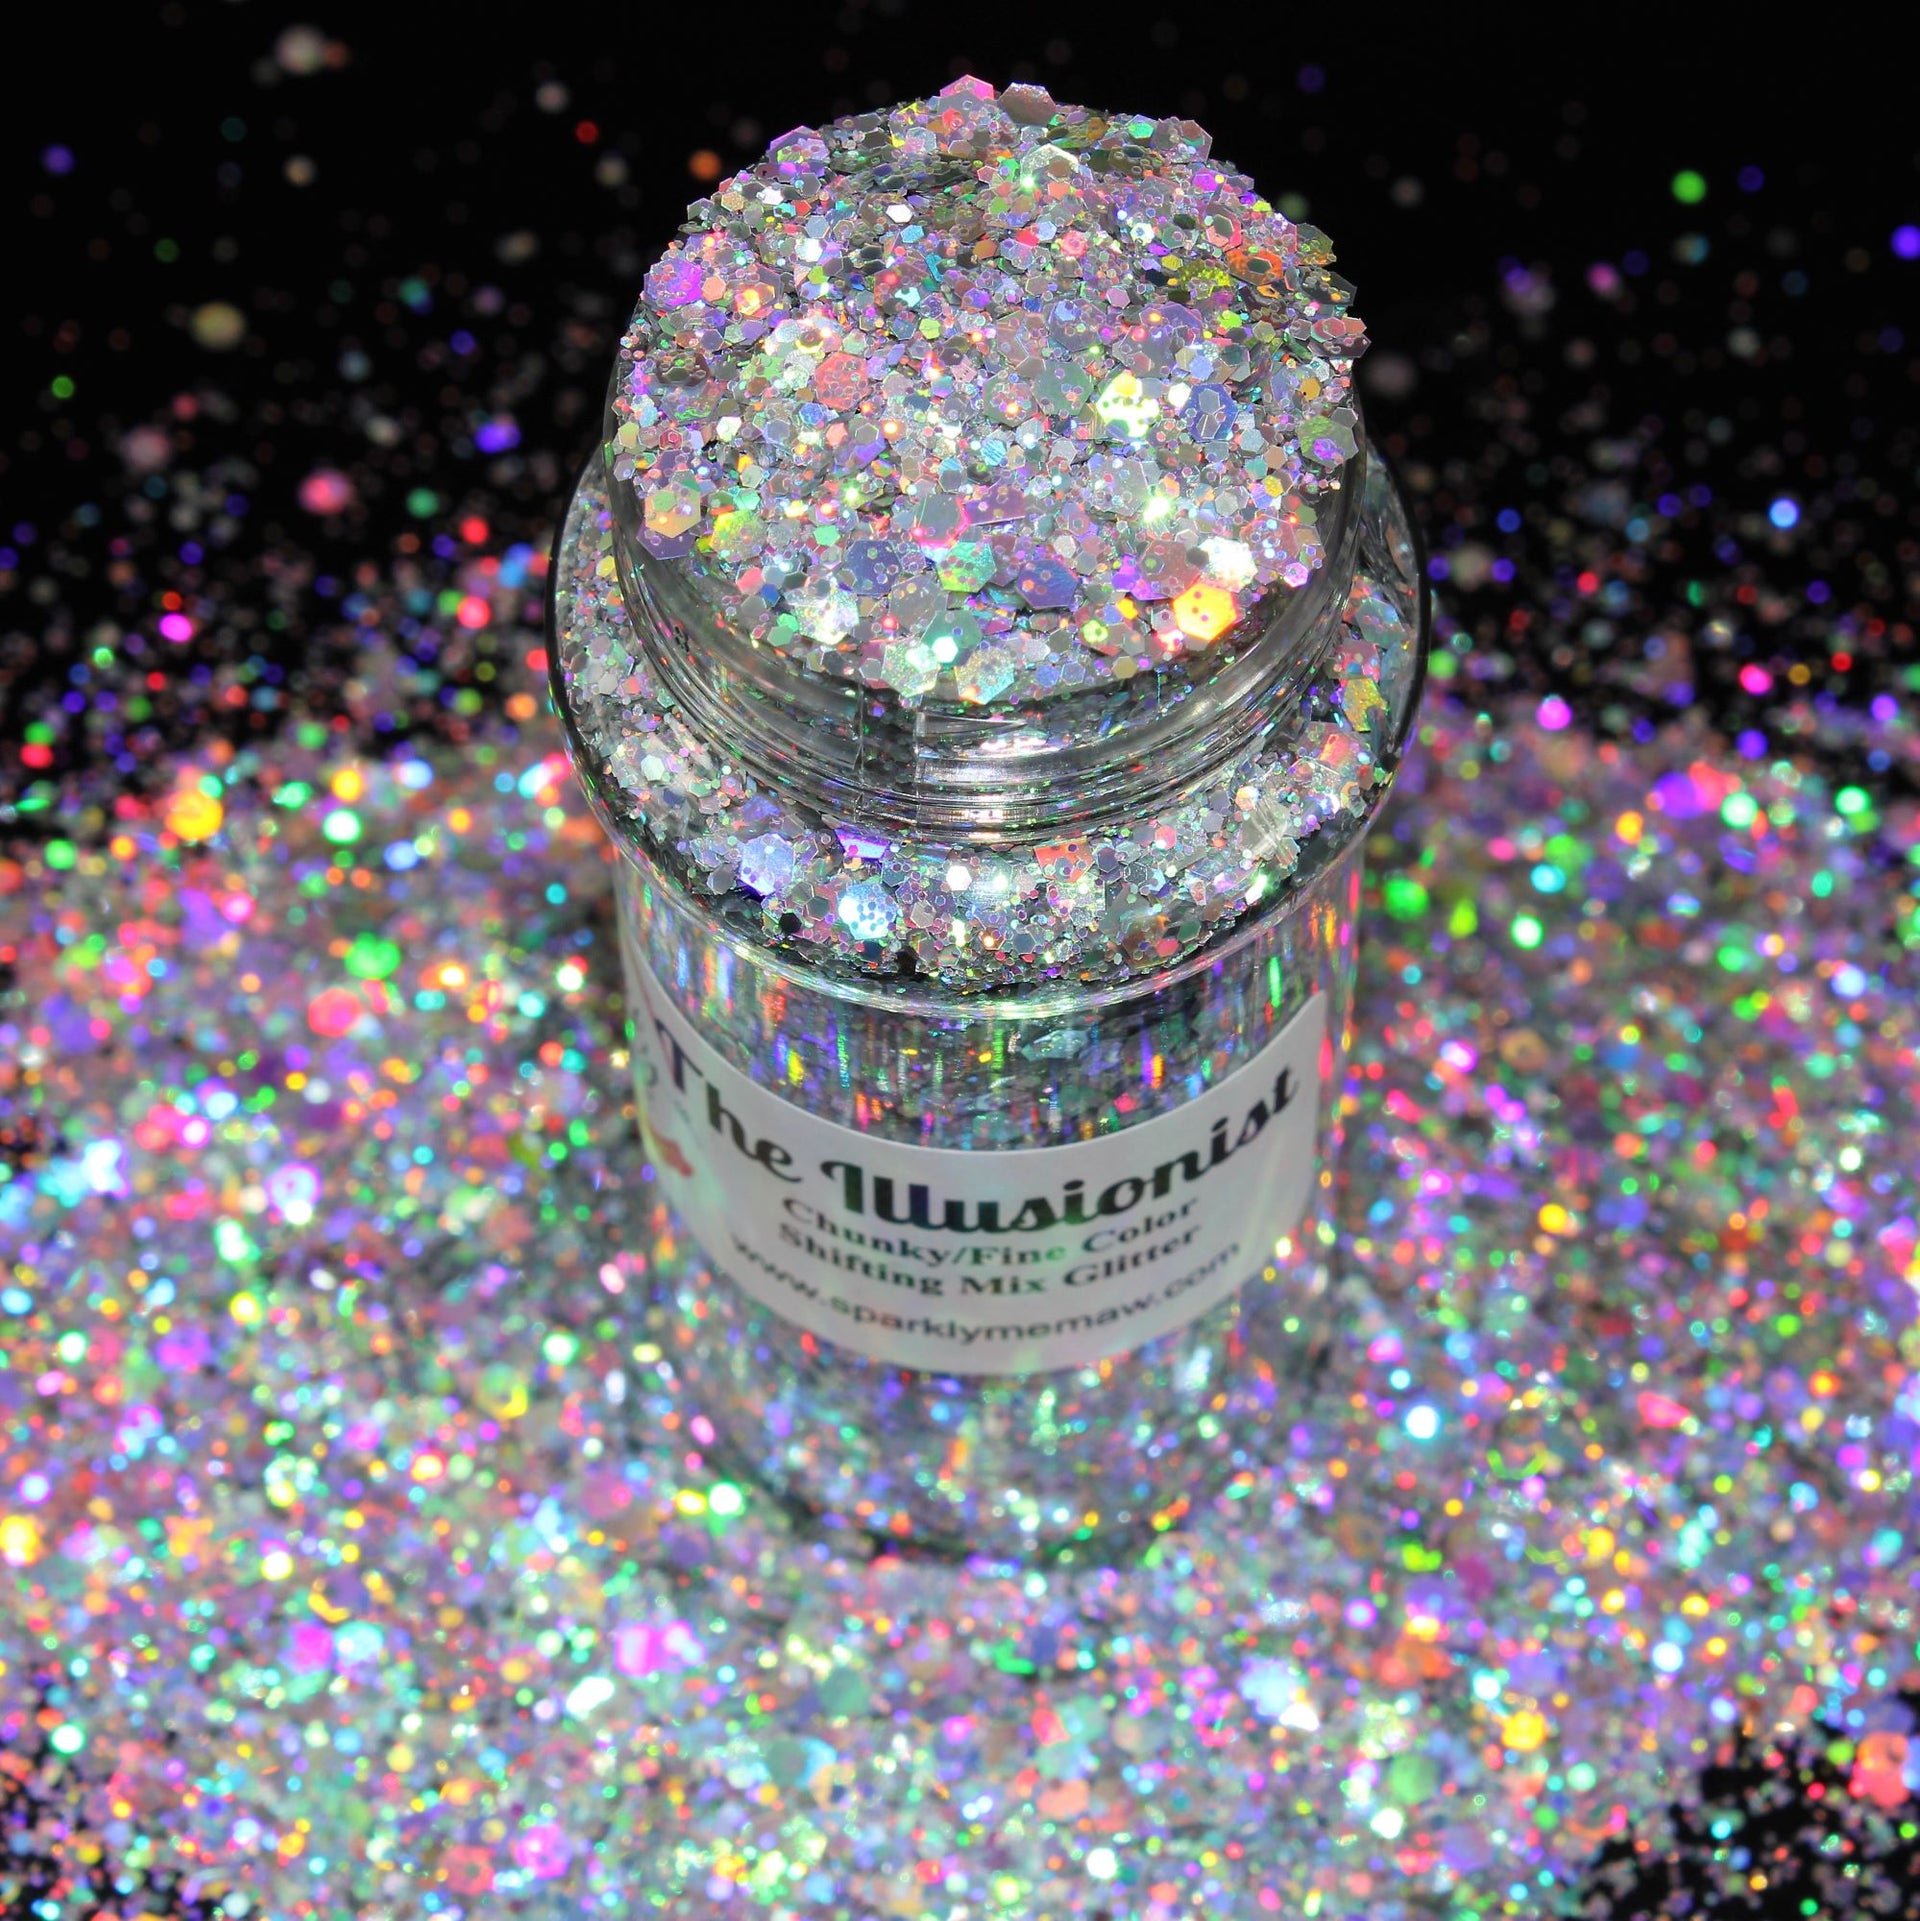 Queen Of Mystery Shifting Glitter Sparkly Fun Loose Glitter For